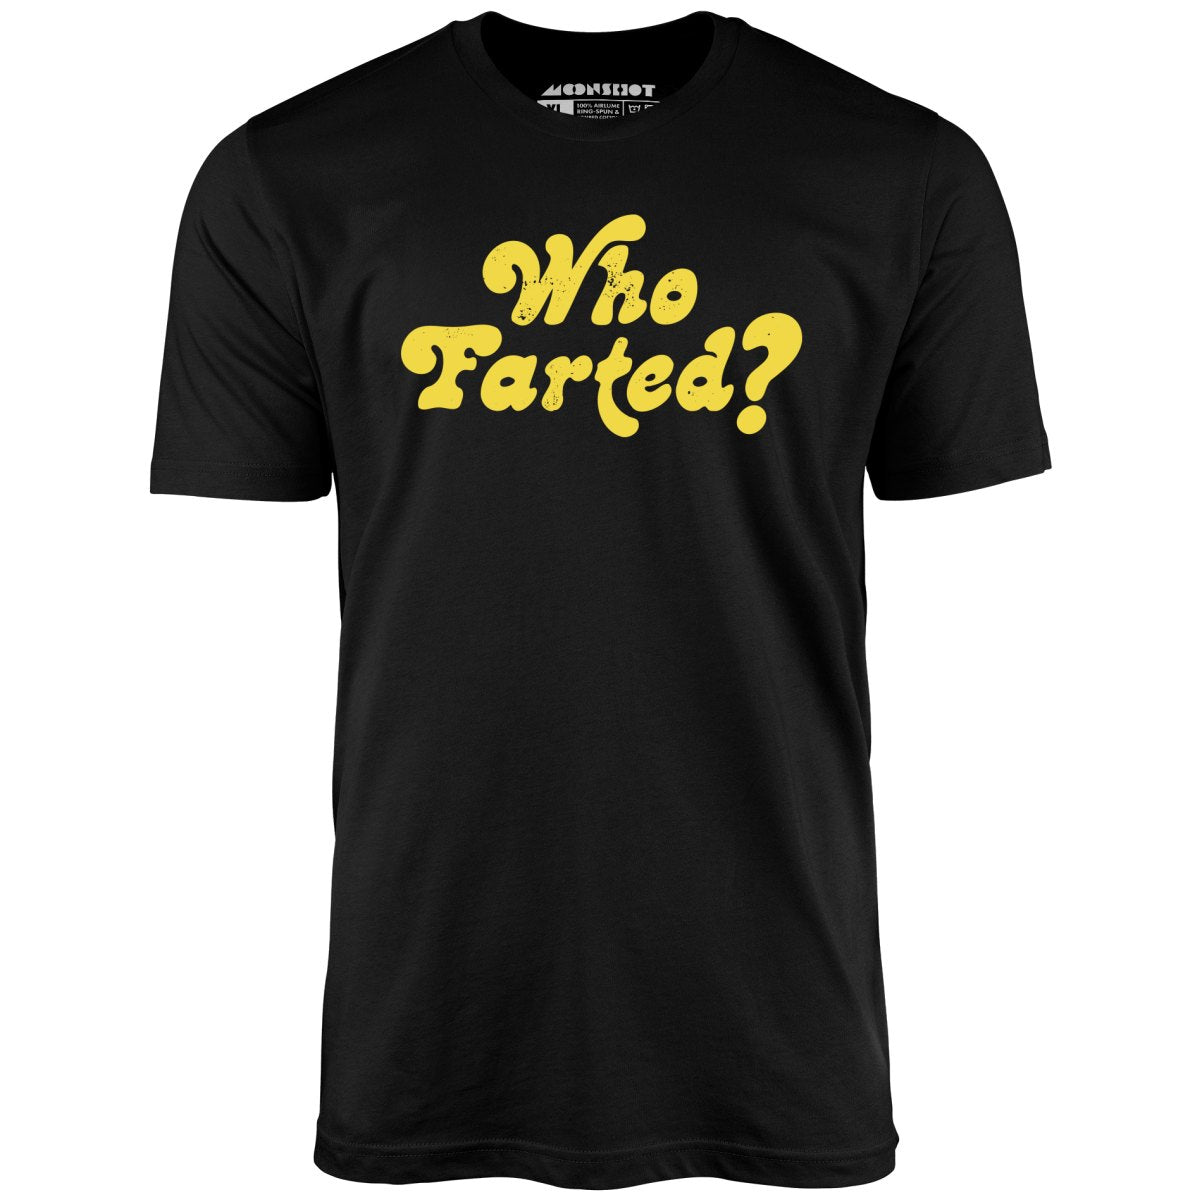 Who Farted? - Unisex T-Shirt